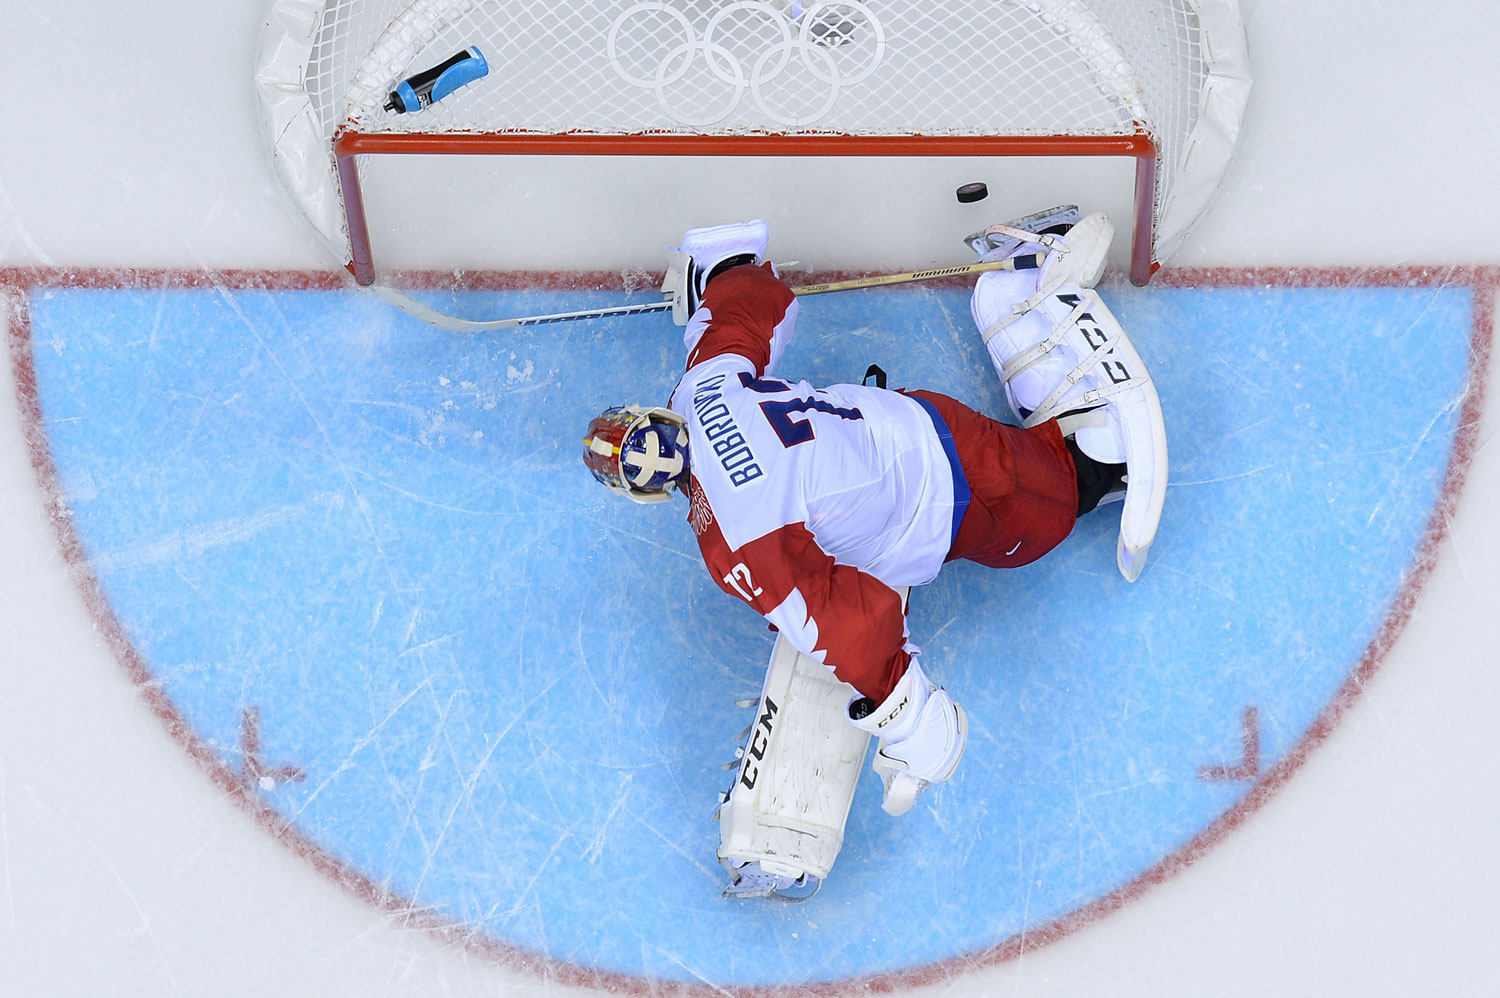 Russia's goalkeeper Sergei Bobrovski fails to stop a penalty during the Men's Ice Hockey Group A match USA vs Russia at the Bolshoy Ice Dome during the Sochi Winter Olympics on February 15, 2014 in Sochi.